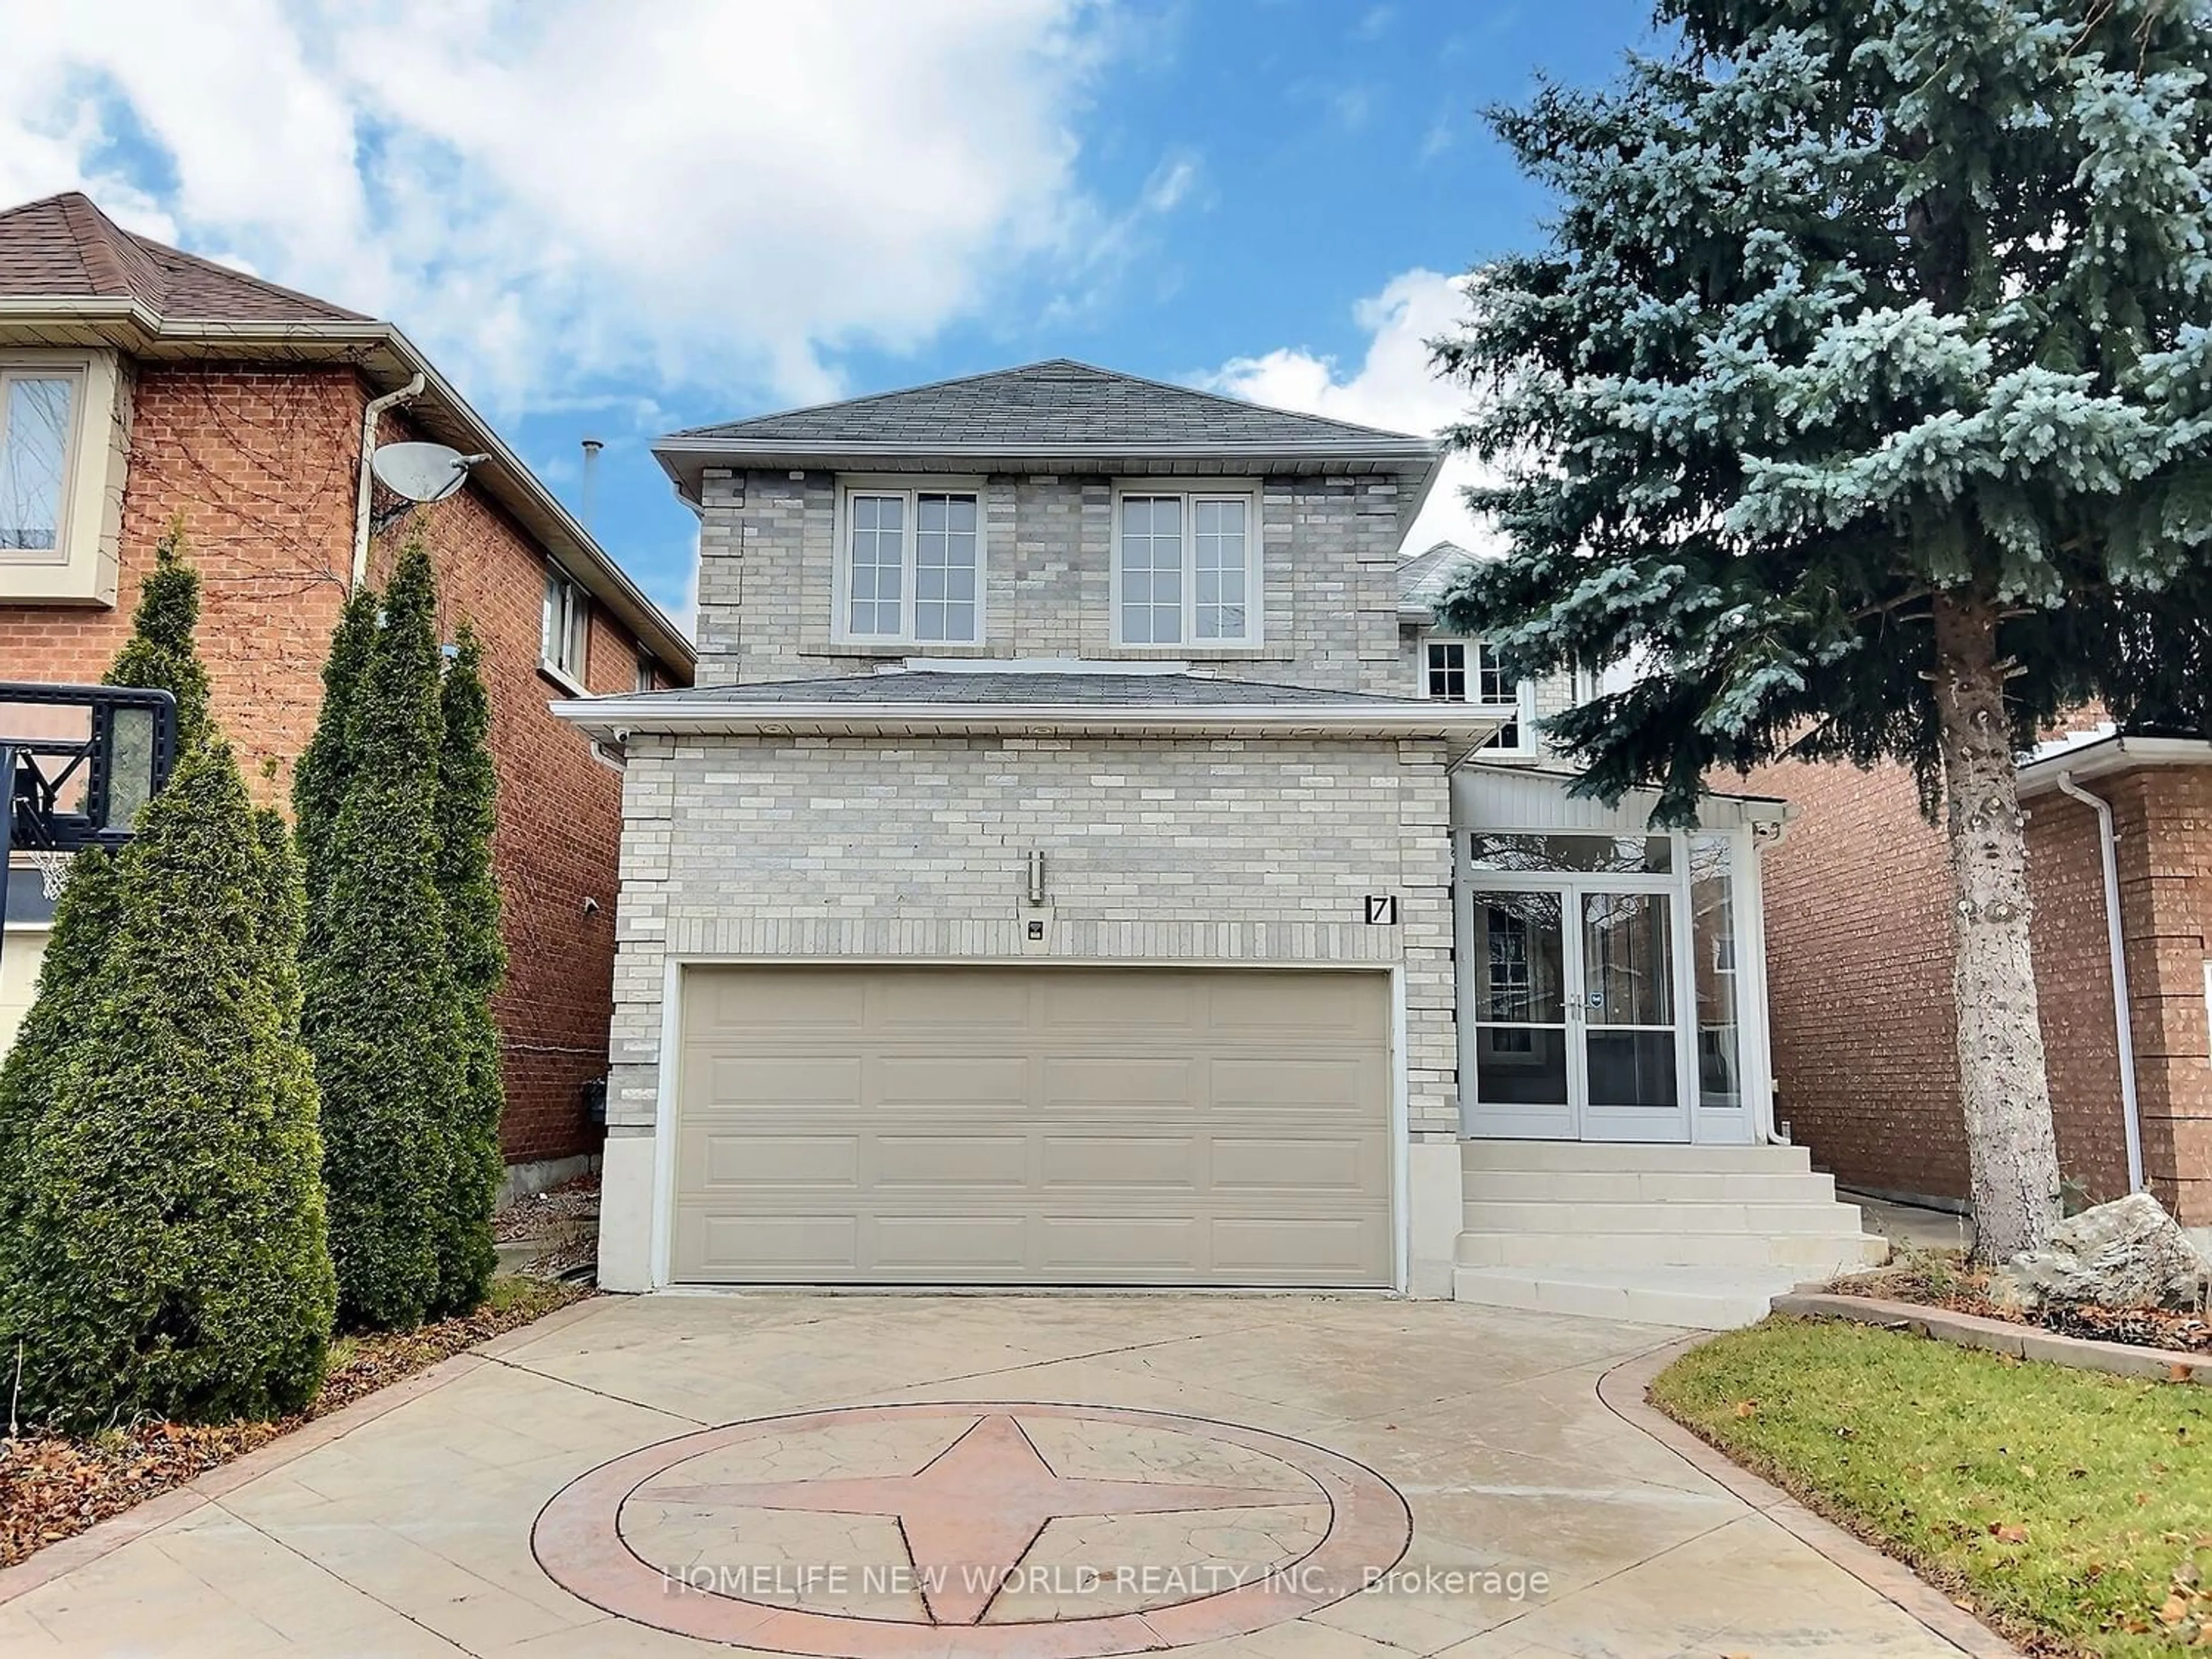 Home with brick exterior material for 7 Glenbury Dr, Vaughan Ontario L4J 7X5